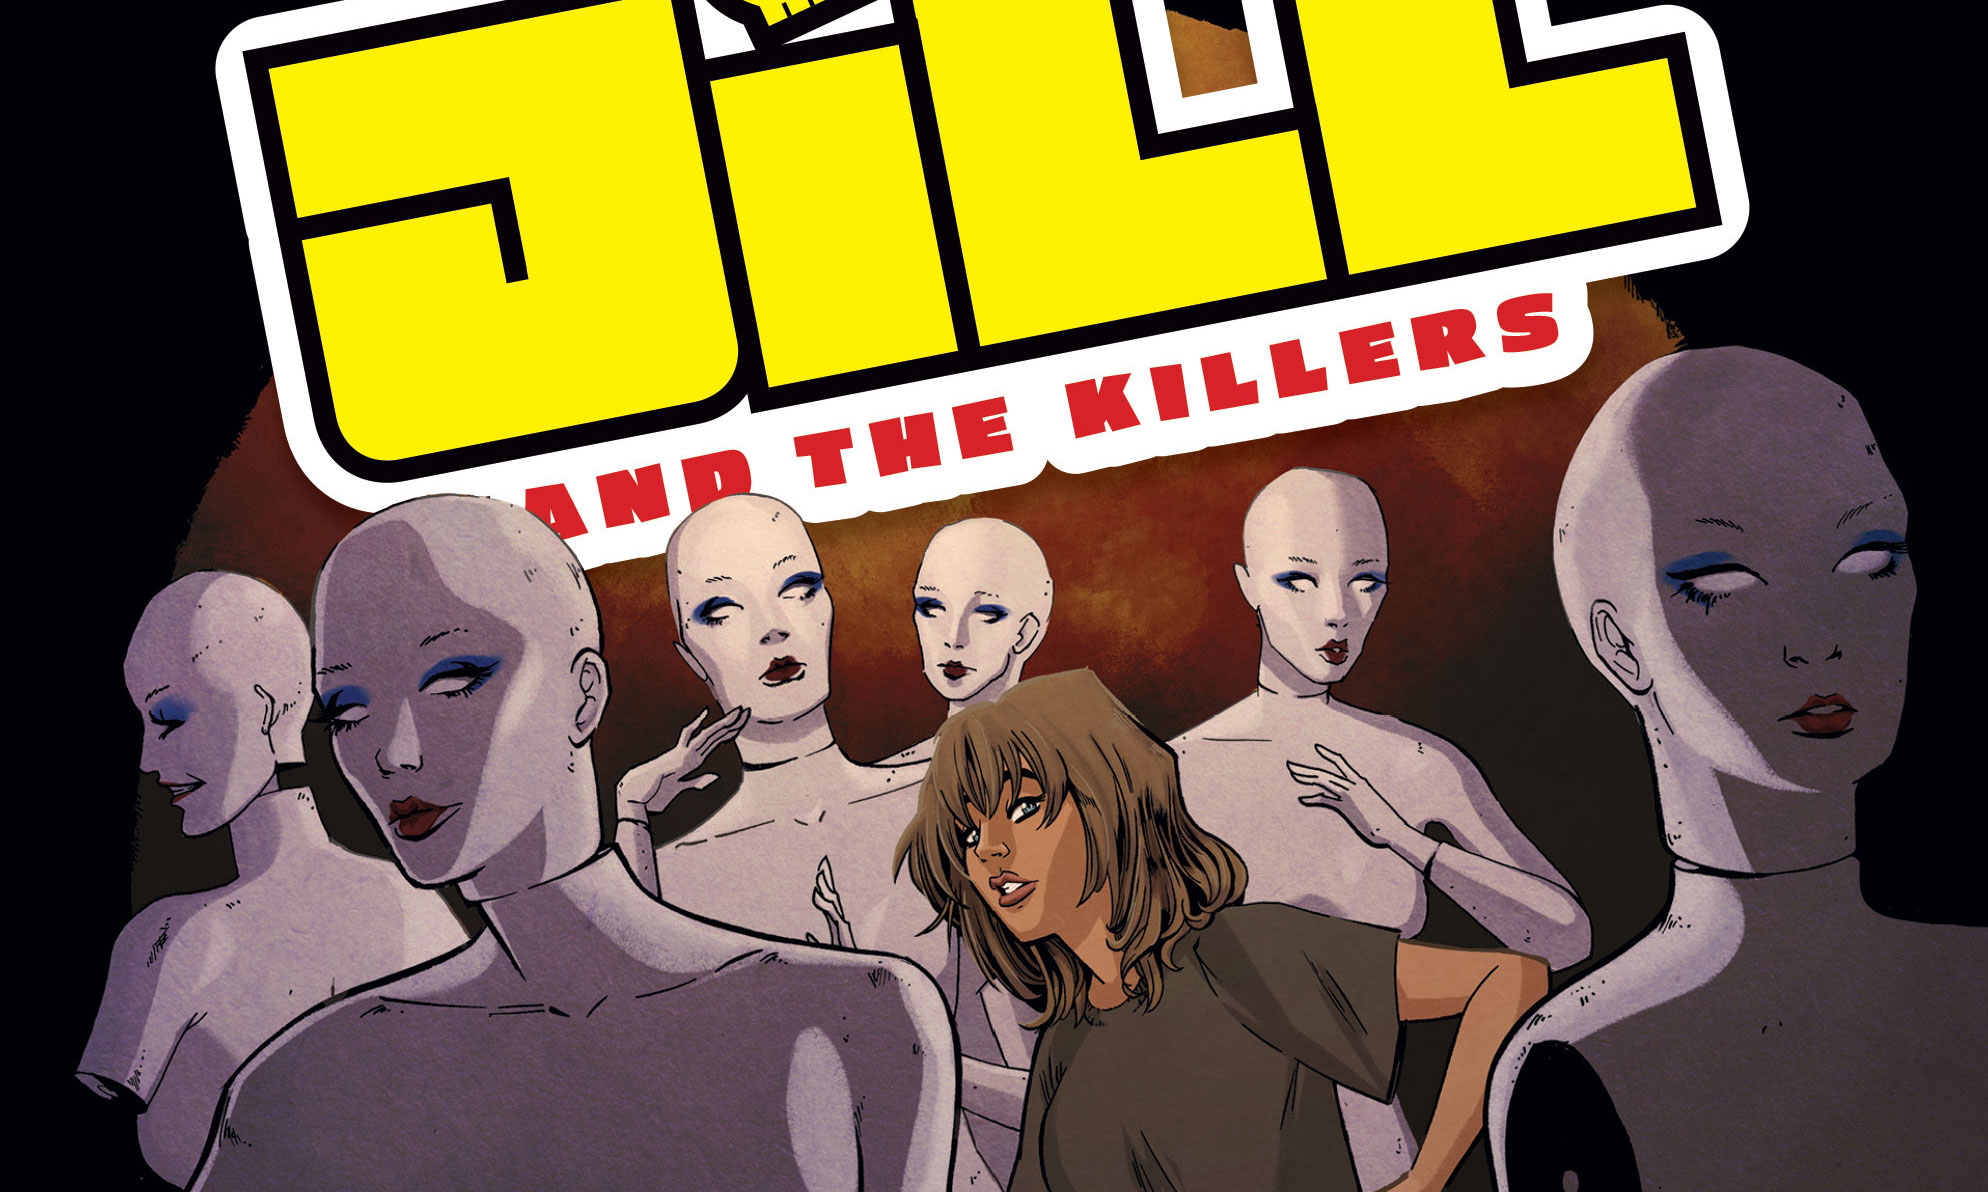 EXCLUSIVE Oni Press Preview: Jill and the Killers #2